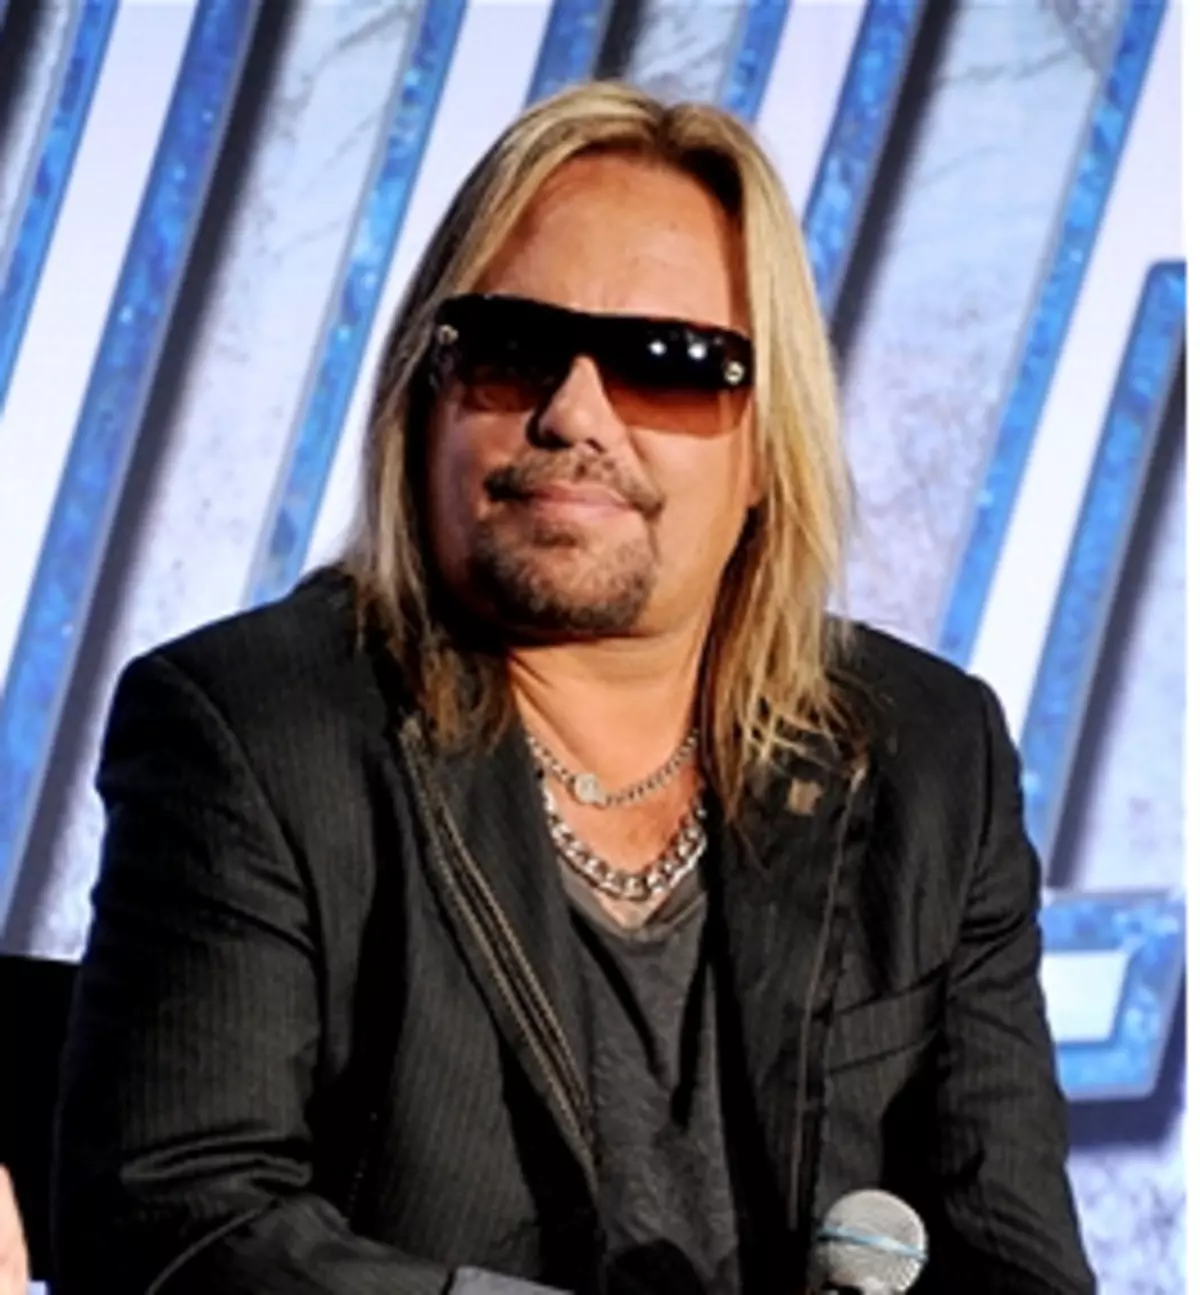 Vince Neil Talks About Rock, Tequila, Las Vegas And Strip Clubs With